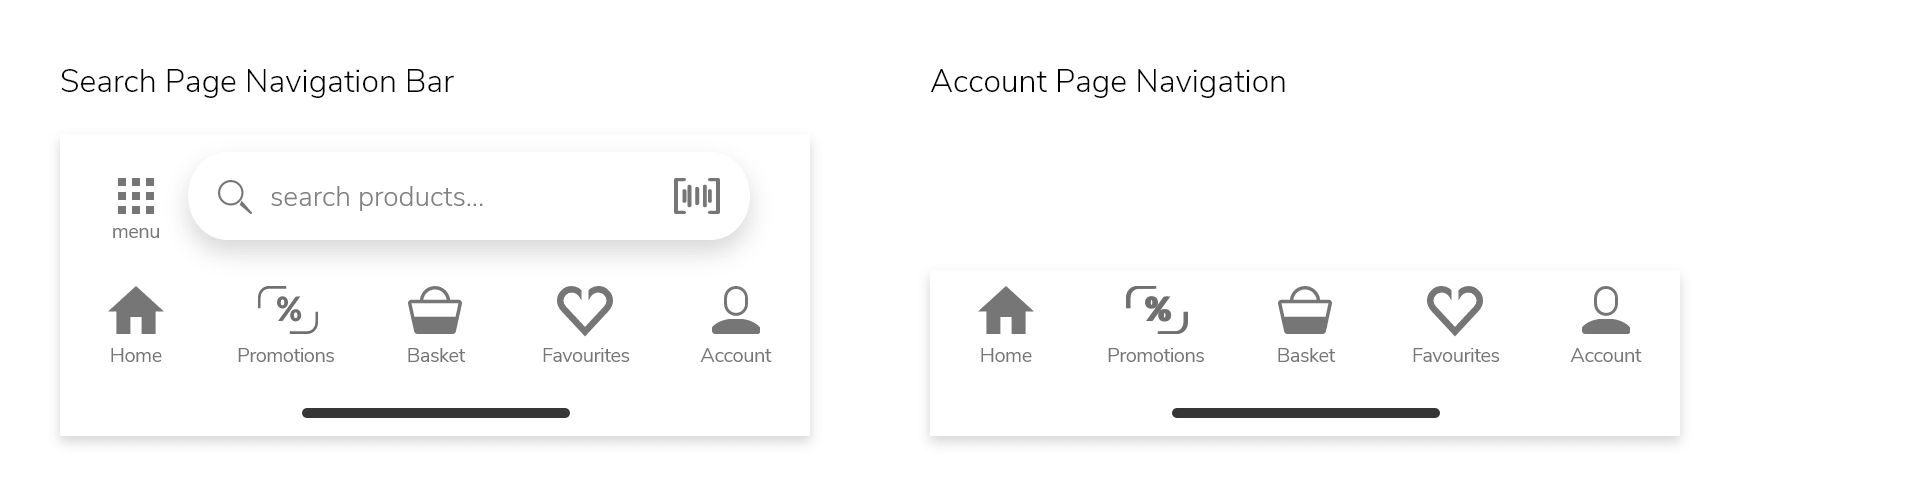 The Bottom Navigation or the Primary navigation showing the presence of the category menu, tab navigation elements, and the search bar navigation.